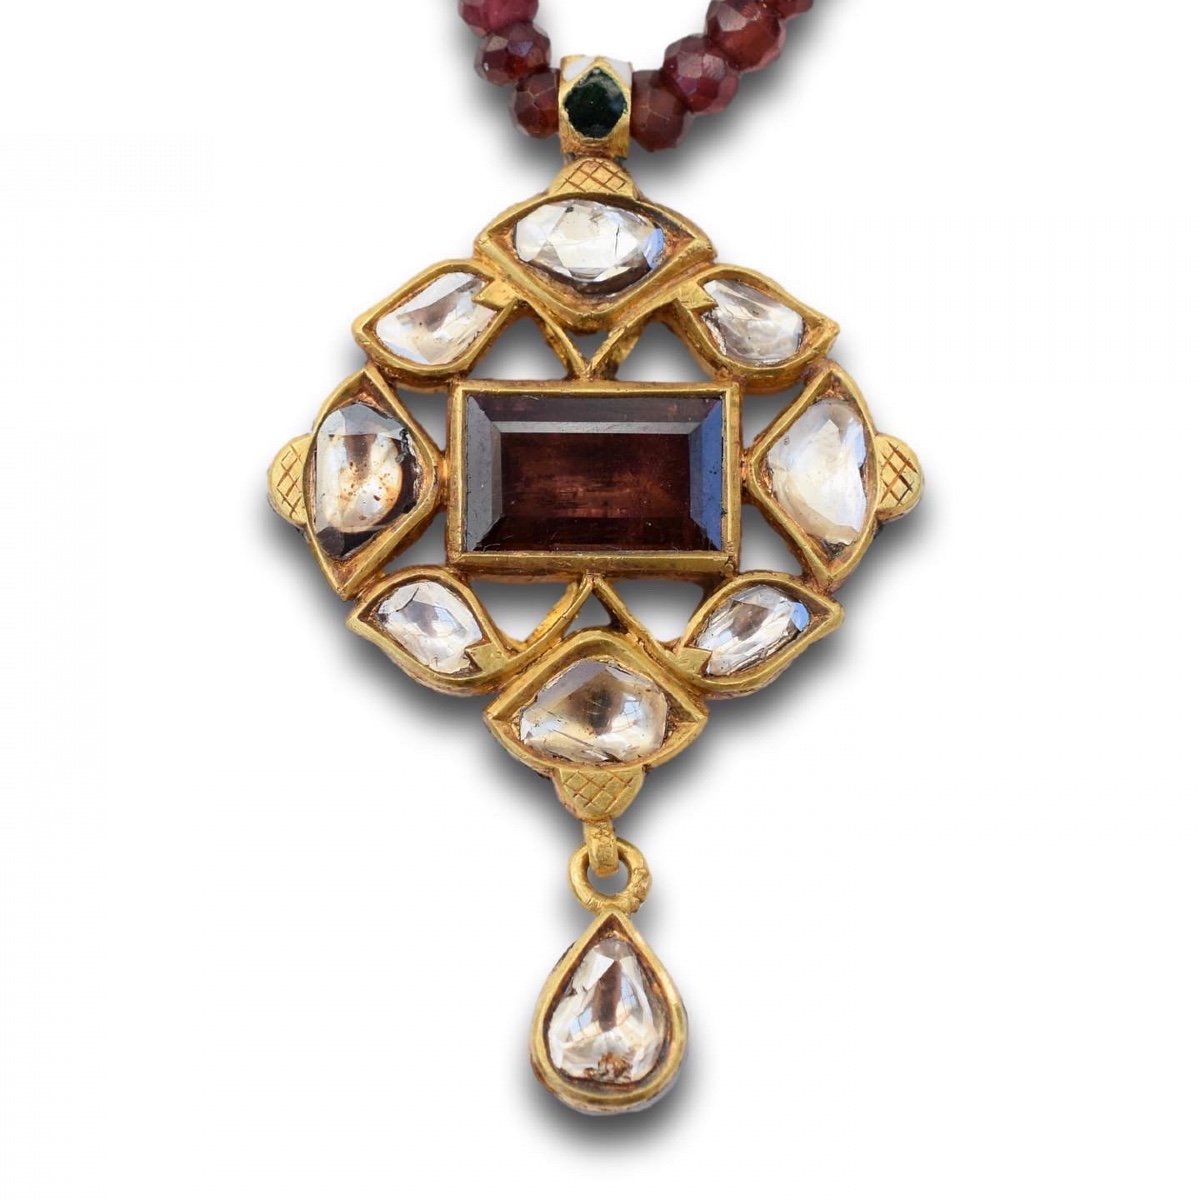 Enamel And Gold Pendant With Diamonds And A Table Cut Garnet. Indian, Circa 1900-photo-2